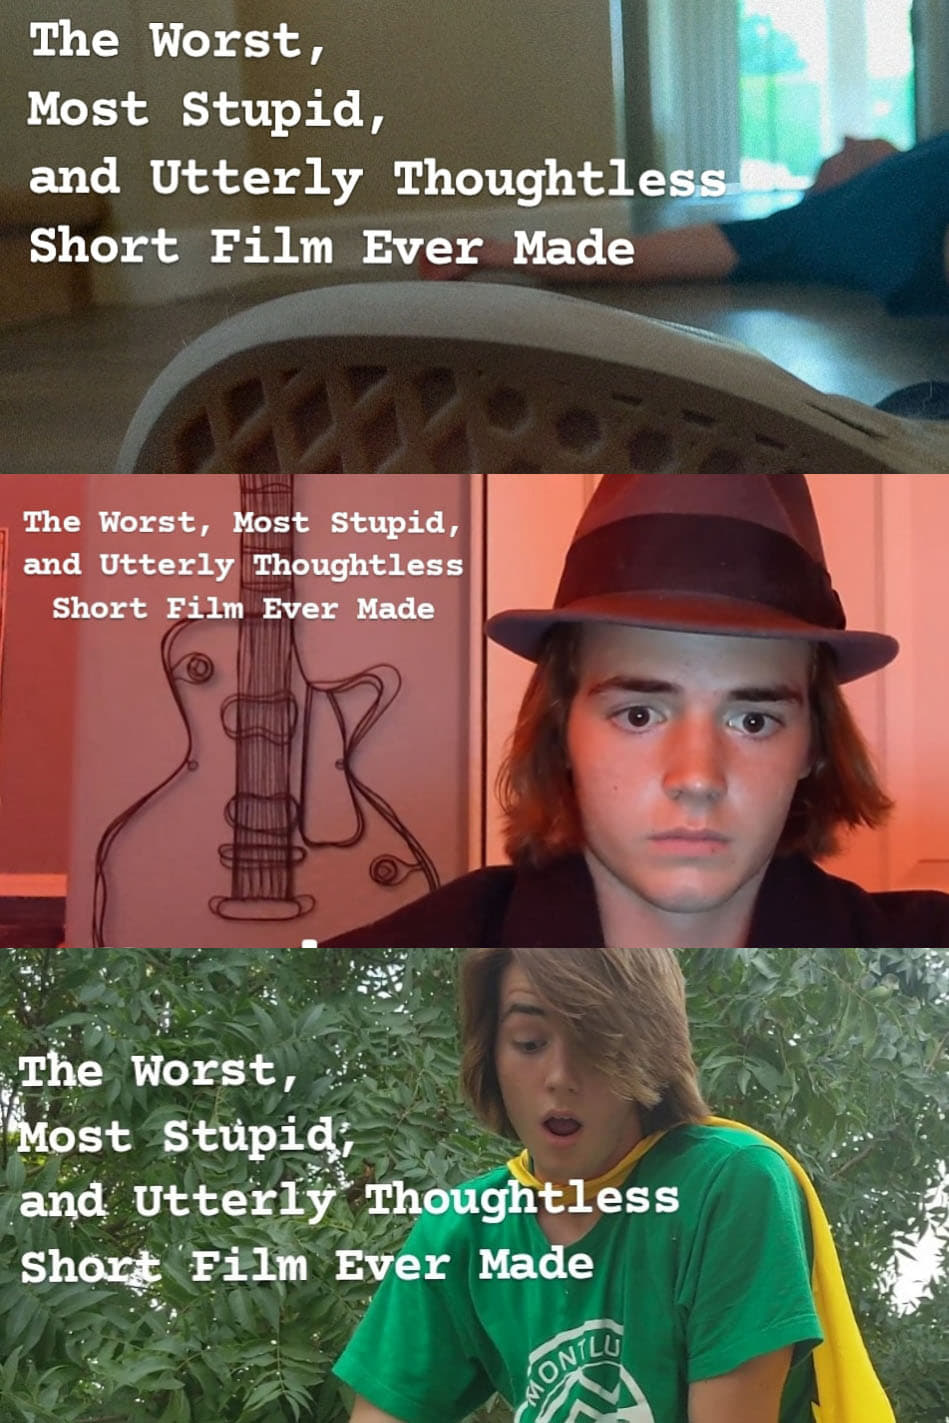 The Worst, Most Stupid, and Utterly Thoughtless Short Film Ever Made